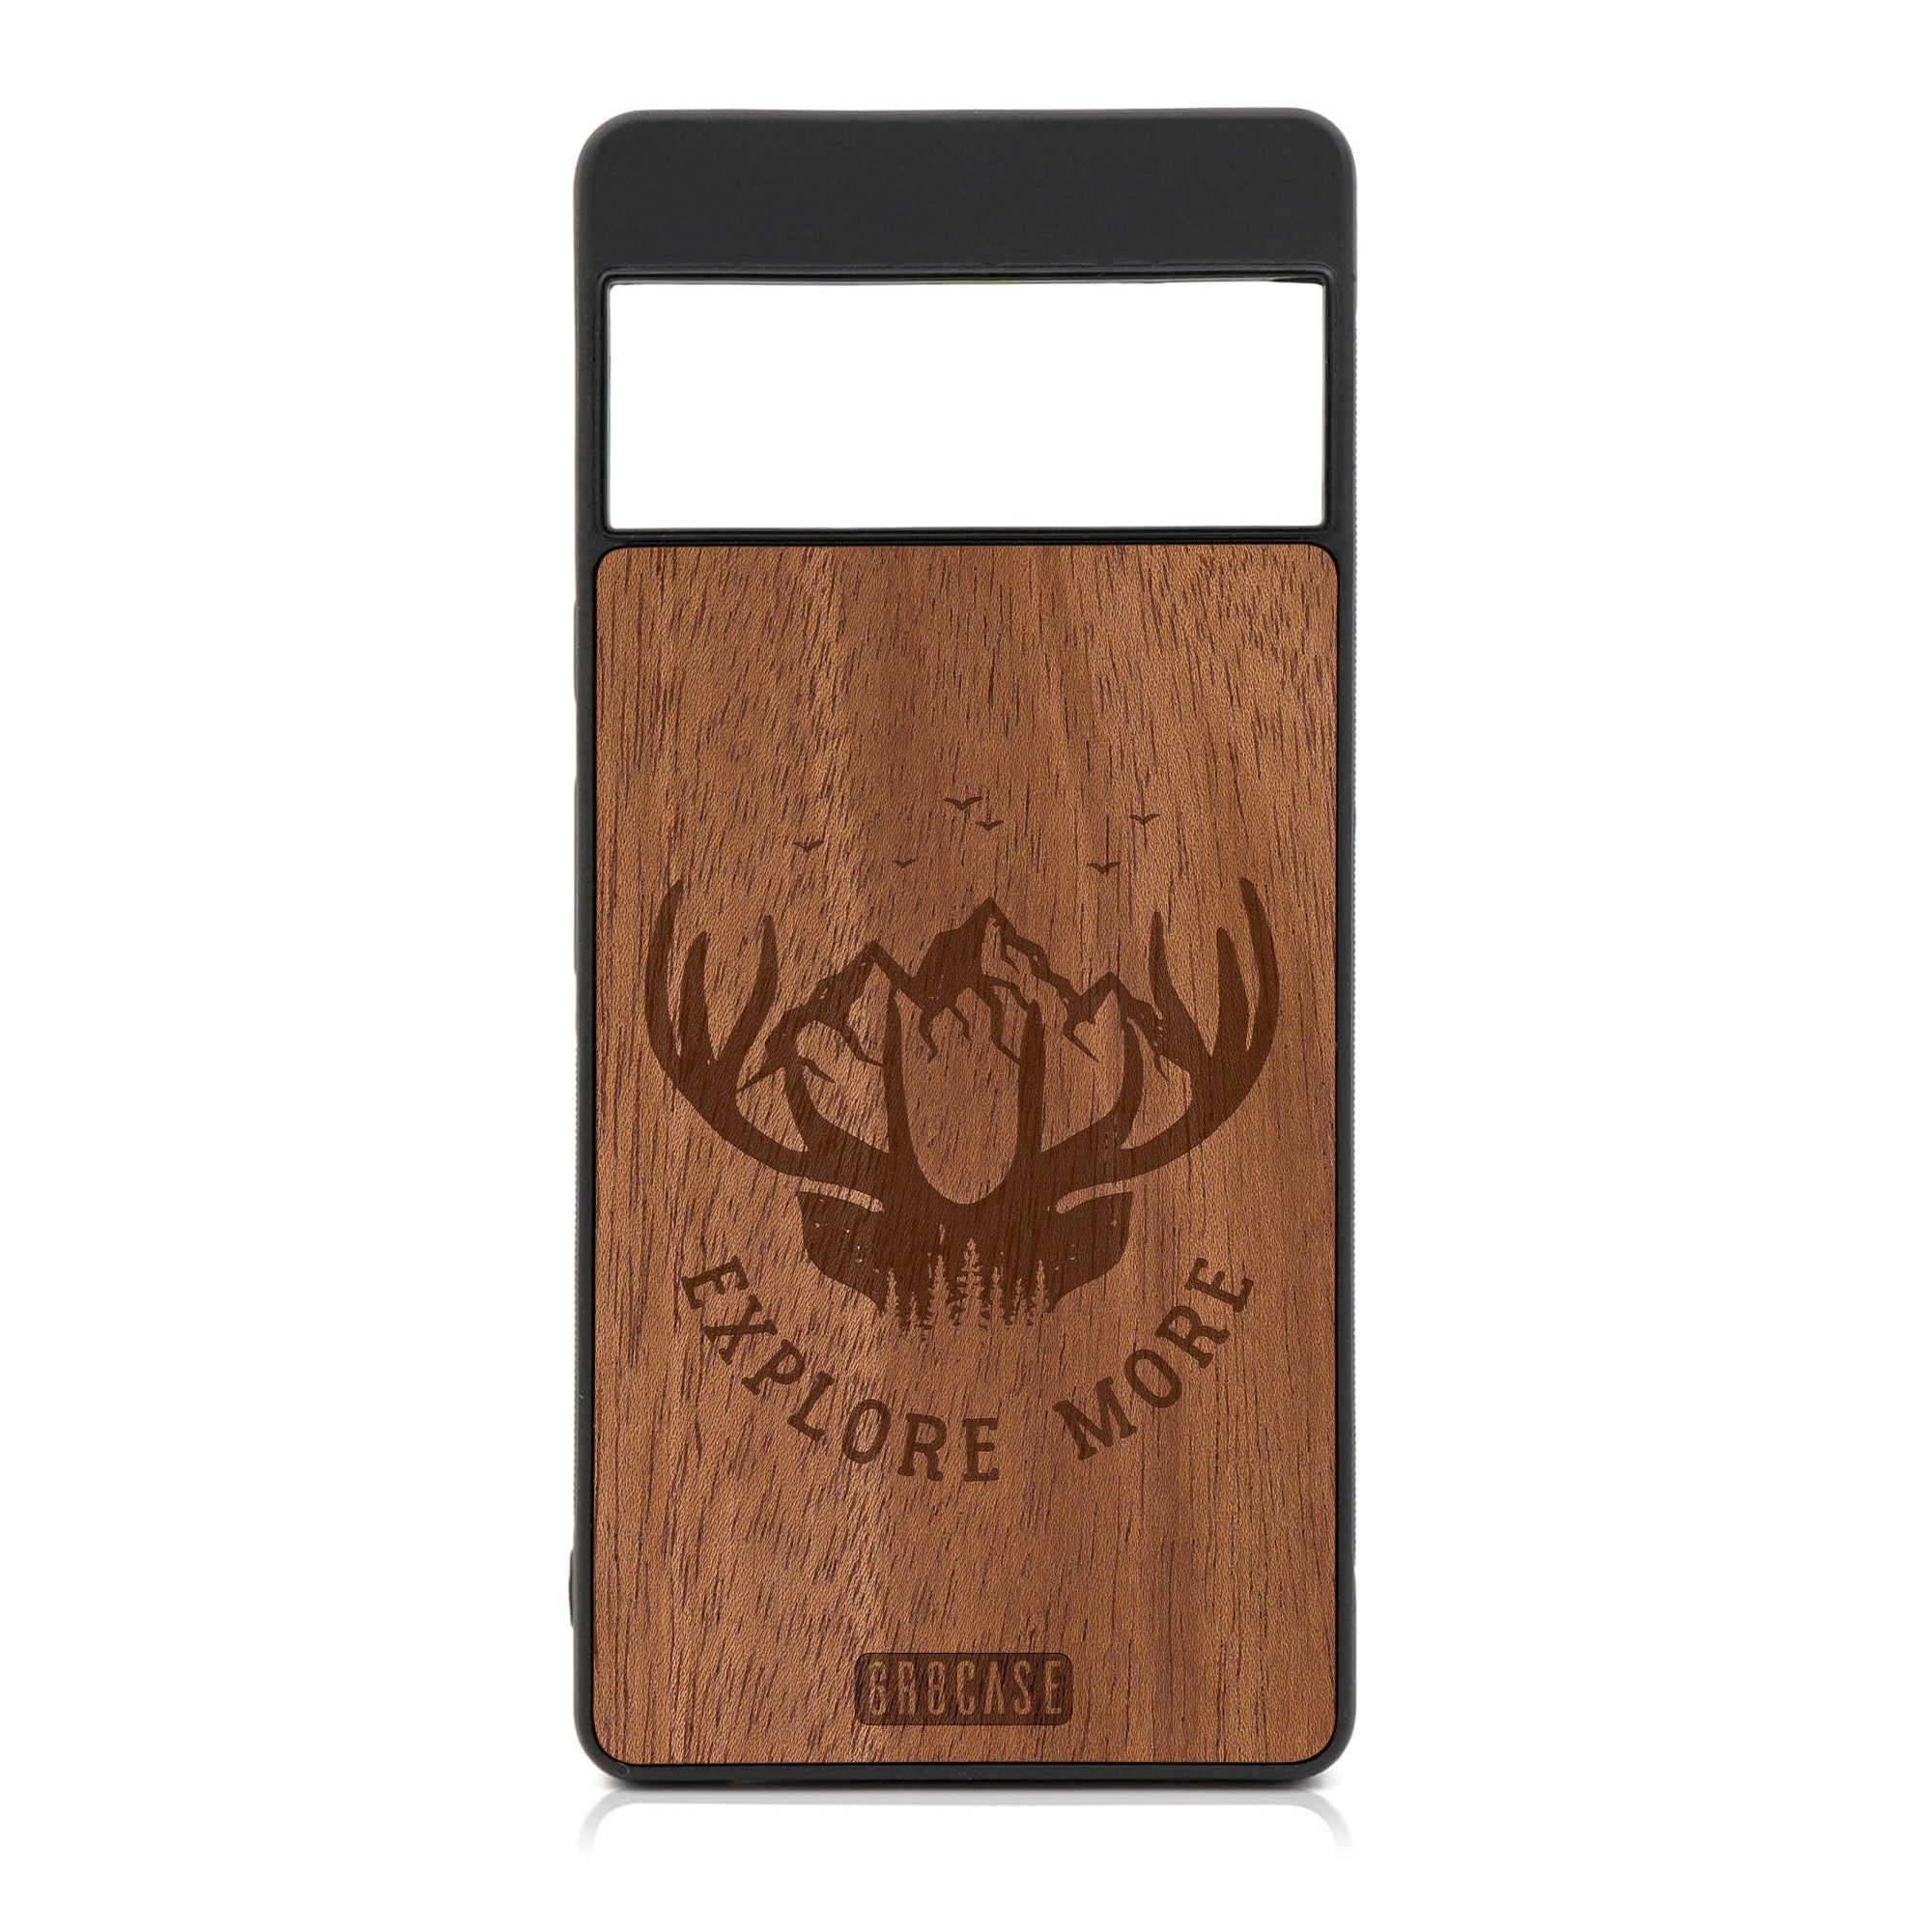 Explore More (Mountain & Antlers) Design Wood Case For Google Pixel 6 Pro